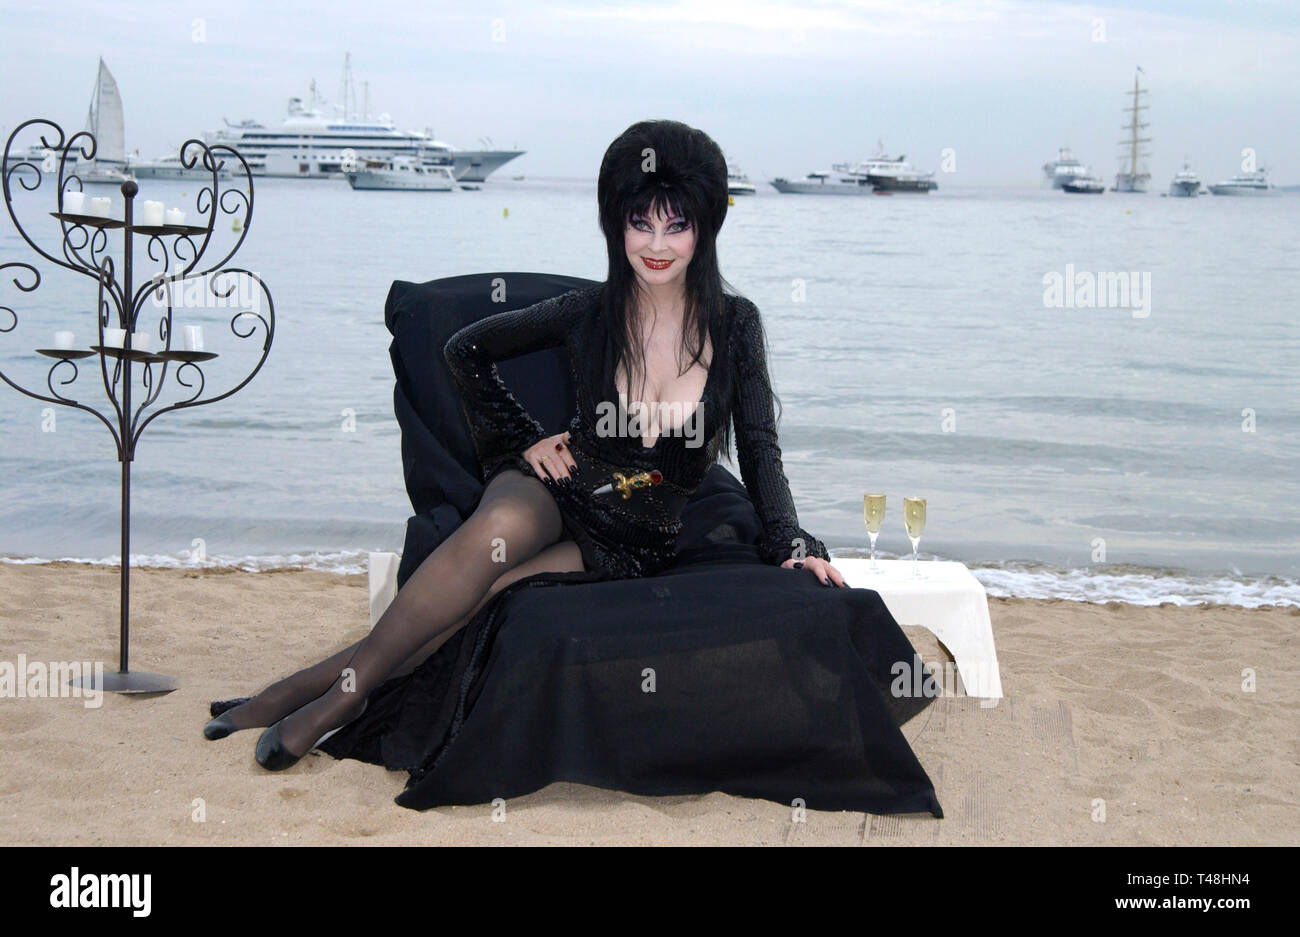 CANNES, FRANCE. May 18, 2003: Actress ELVIRA (CASSANDRA PETERSON) at photocall at the Cannes Film Festival for her new movie Elvira's Haunted Hills. Stock Photo